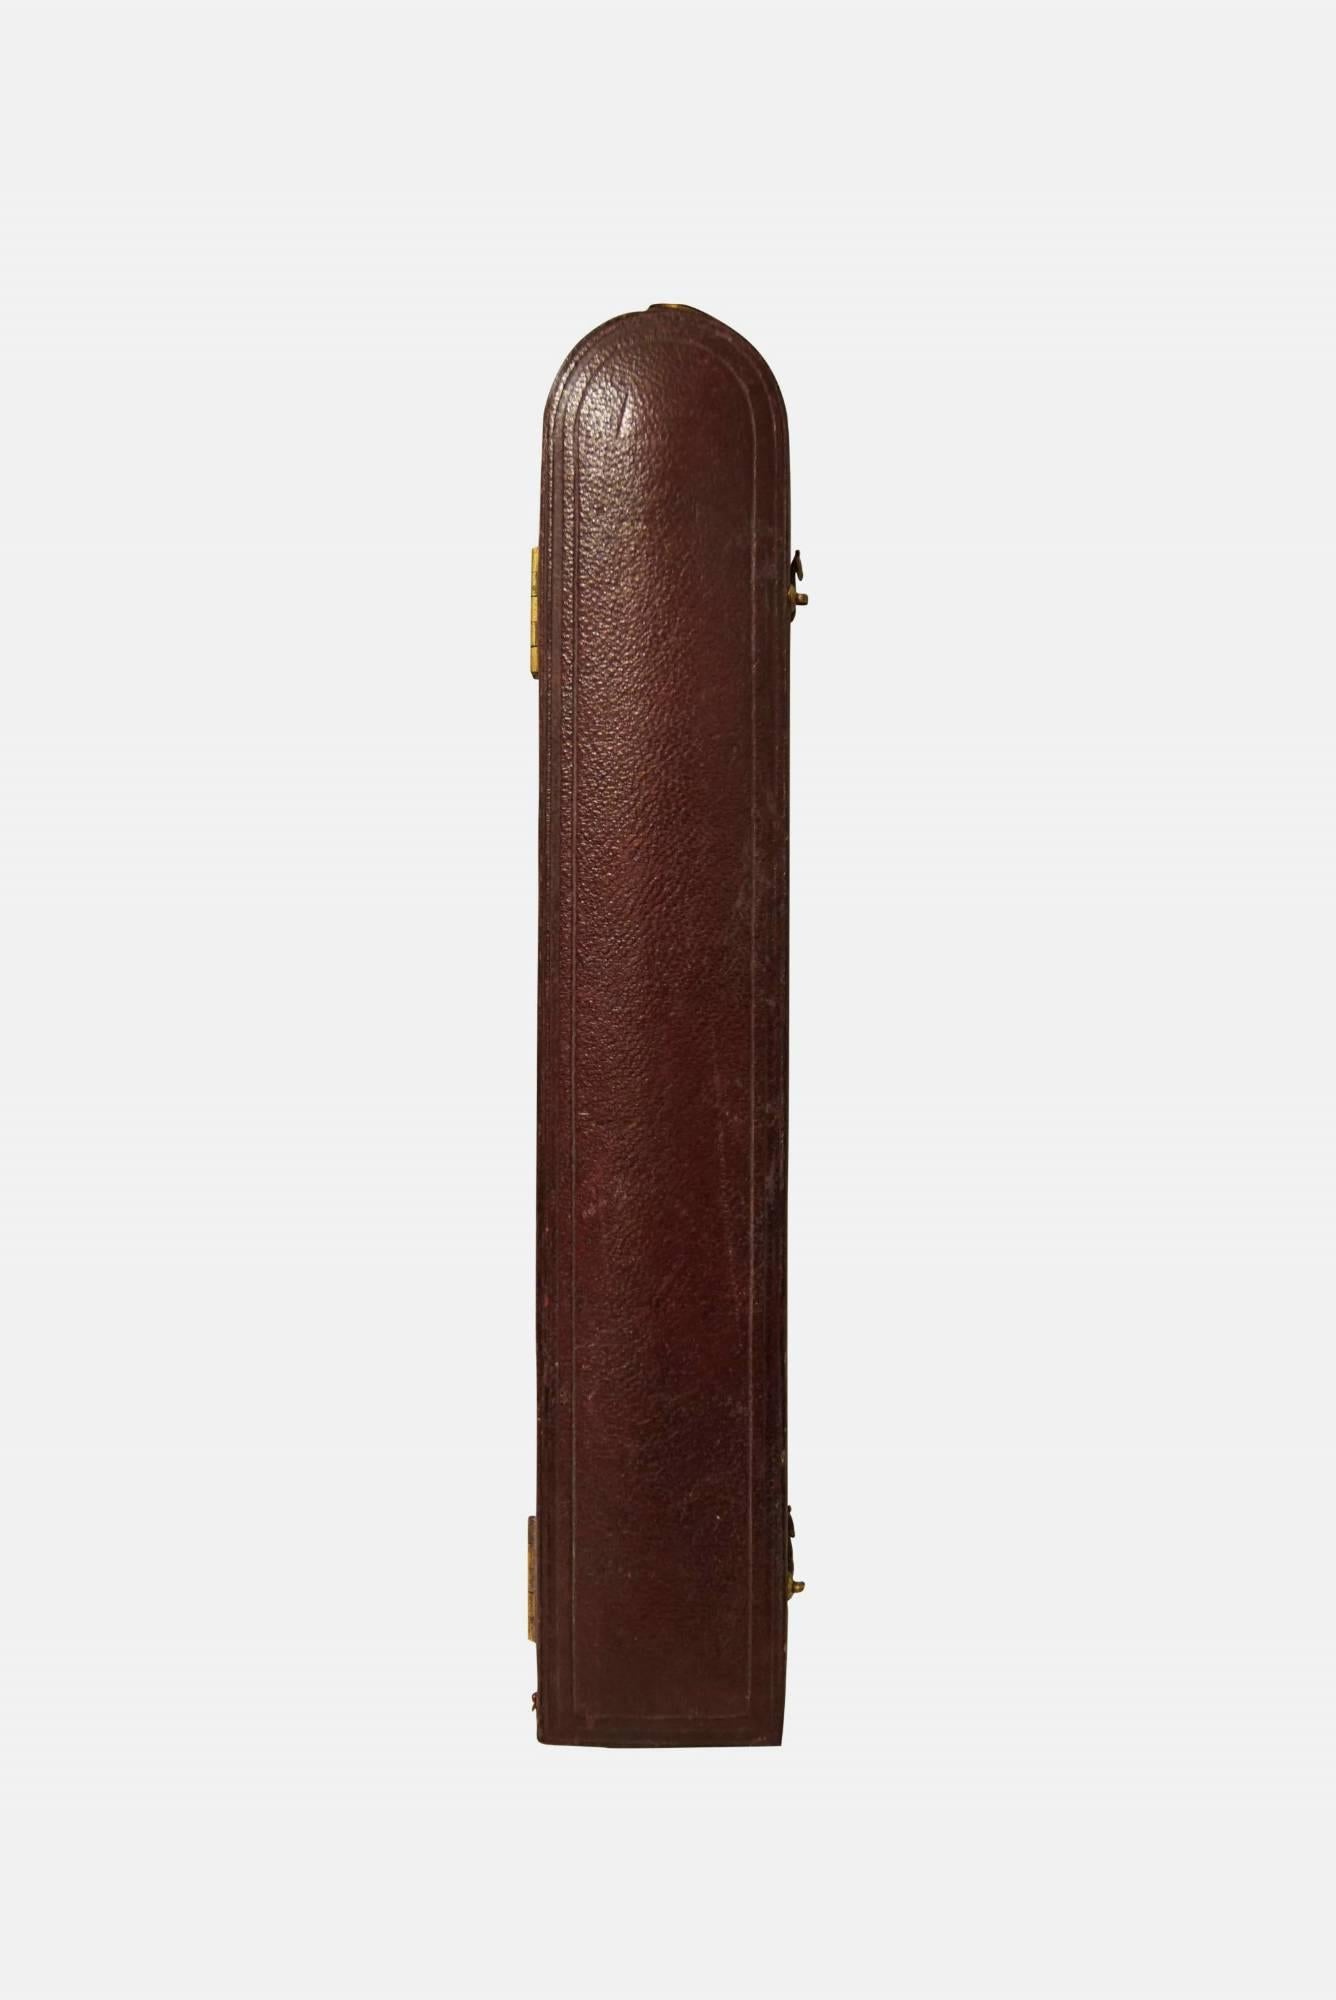 A mid Victorian cased travelling thermometer by Dolland of London.